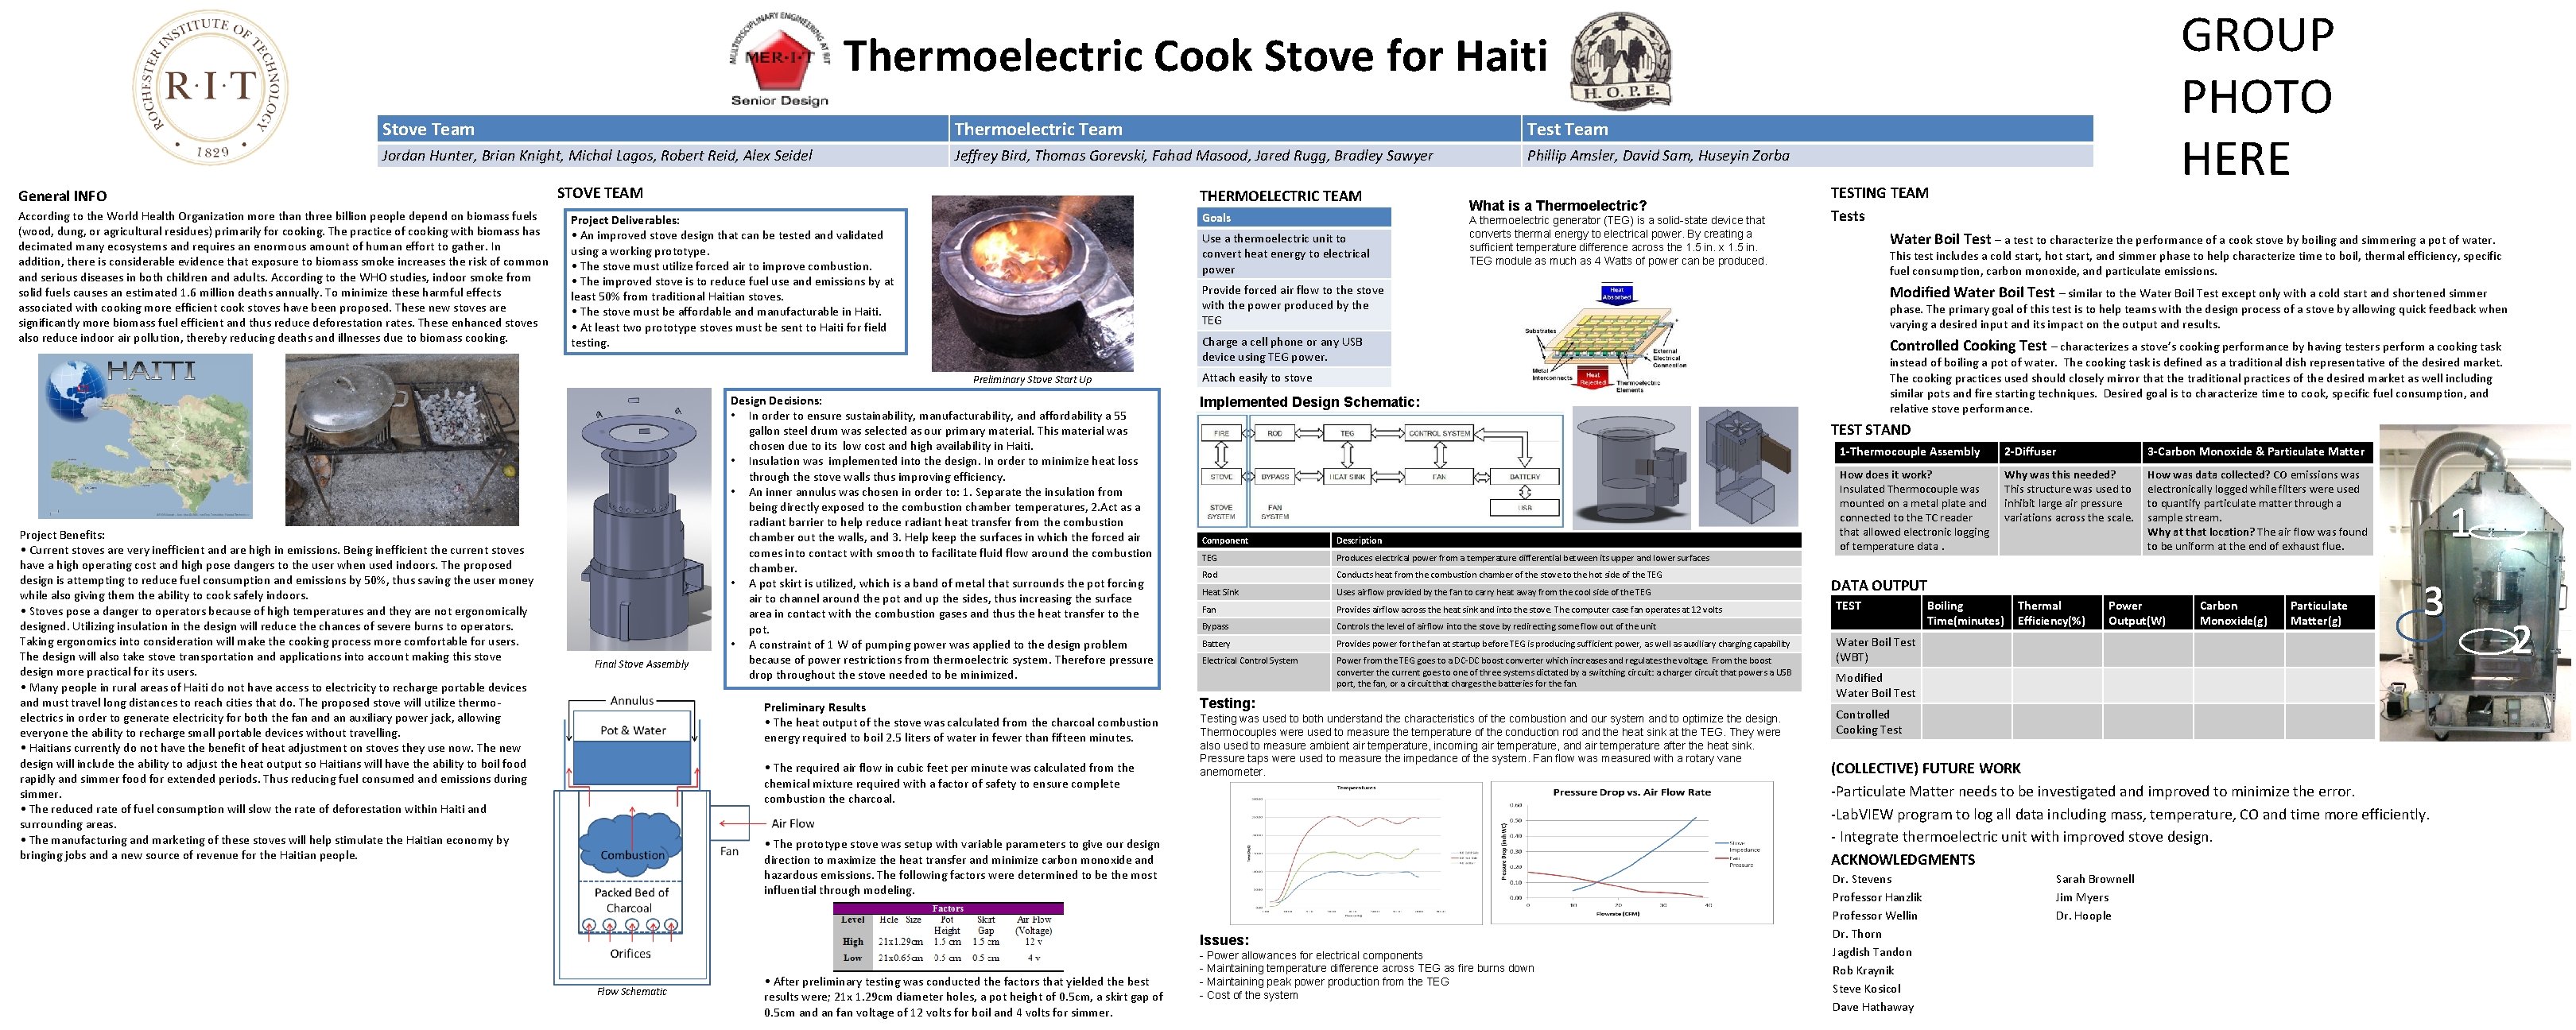 GROUP PHOTO HERE Thermoelectric Cook Stove for Haiti Stove Team Thermoelectric Team Test Team